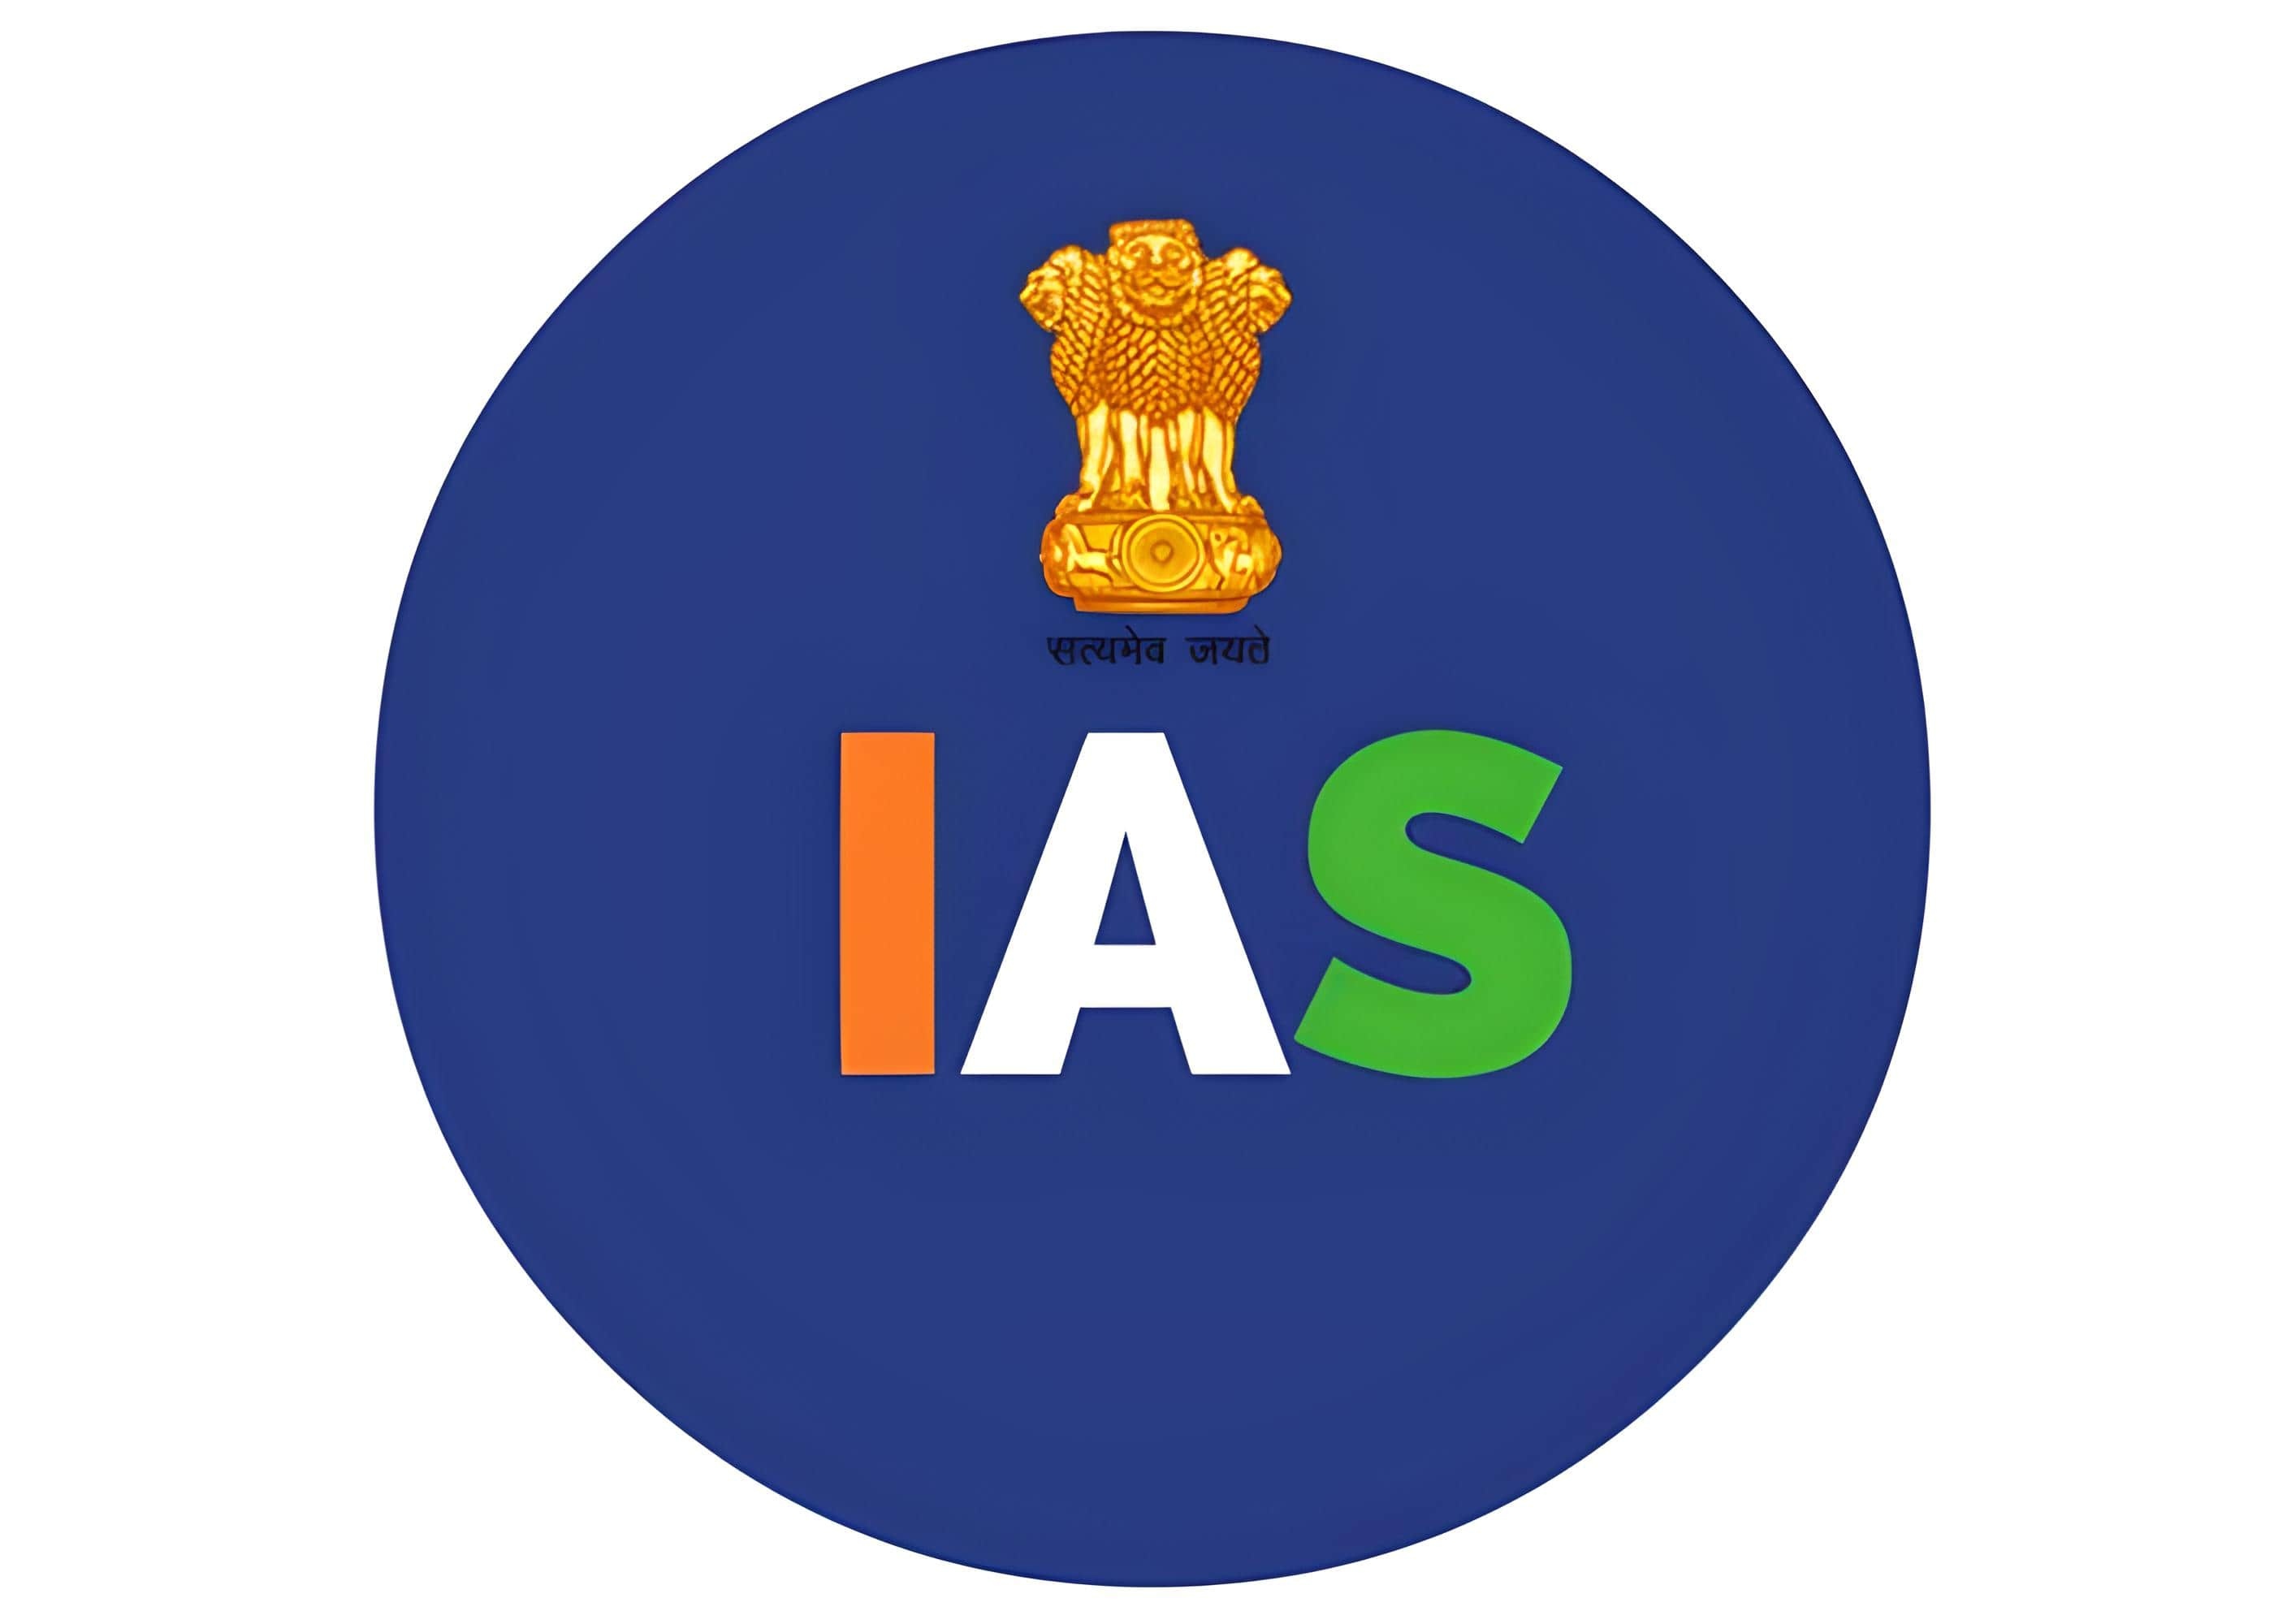 Ias - Indian Administrative Service